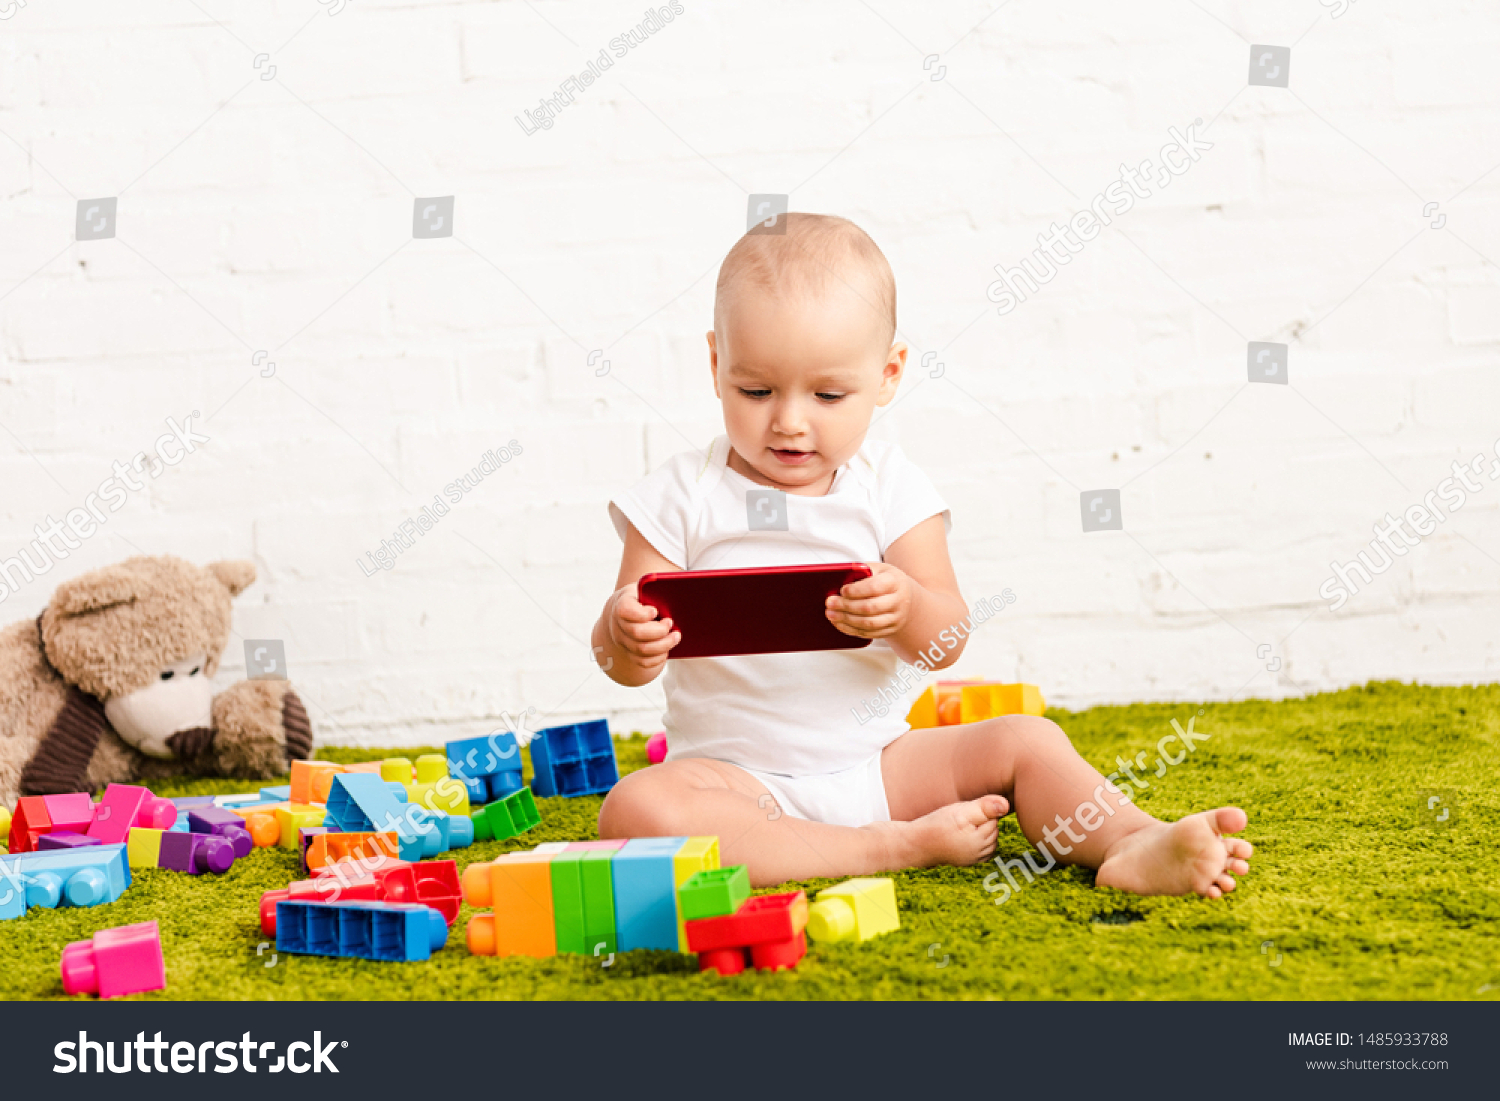 adorbale kid sitting among toys on green floor and holding digital device #1485933788